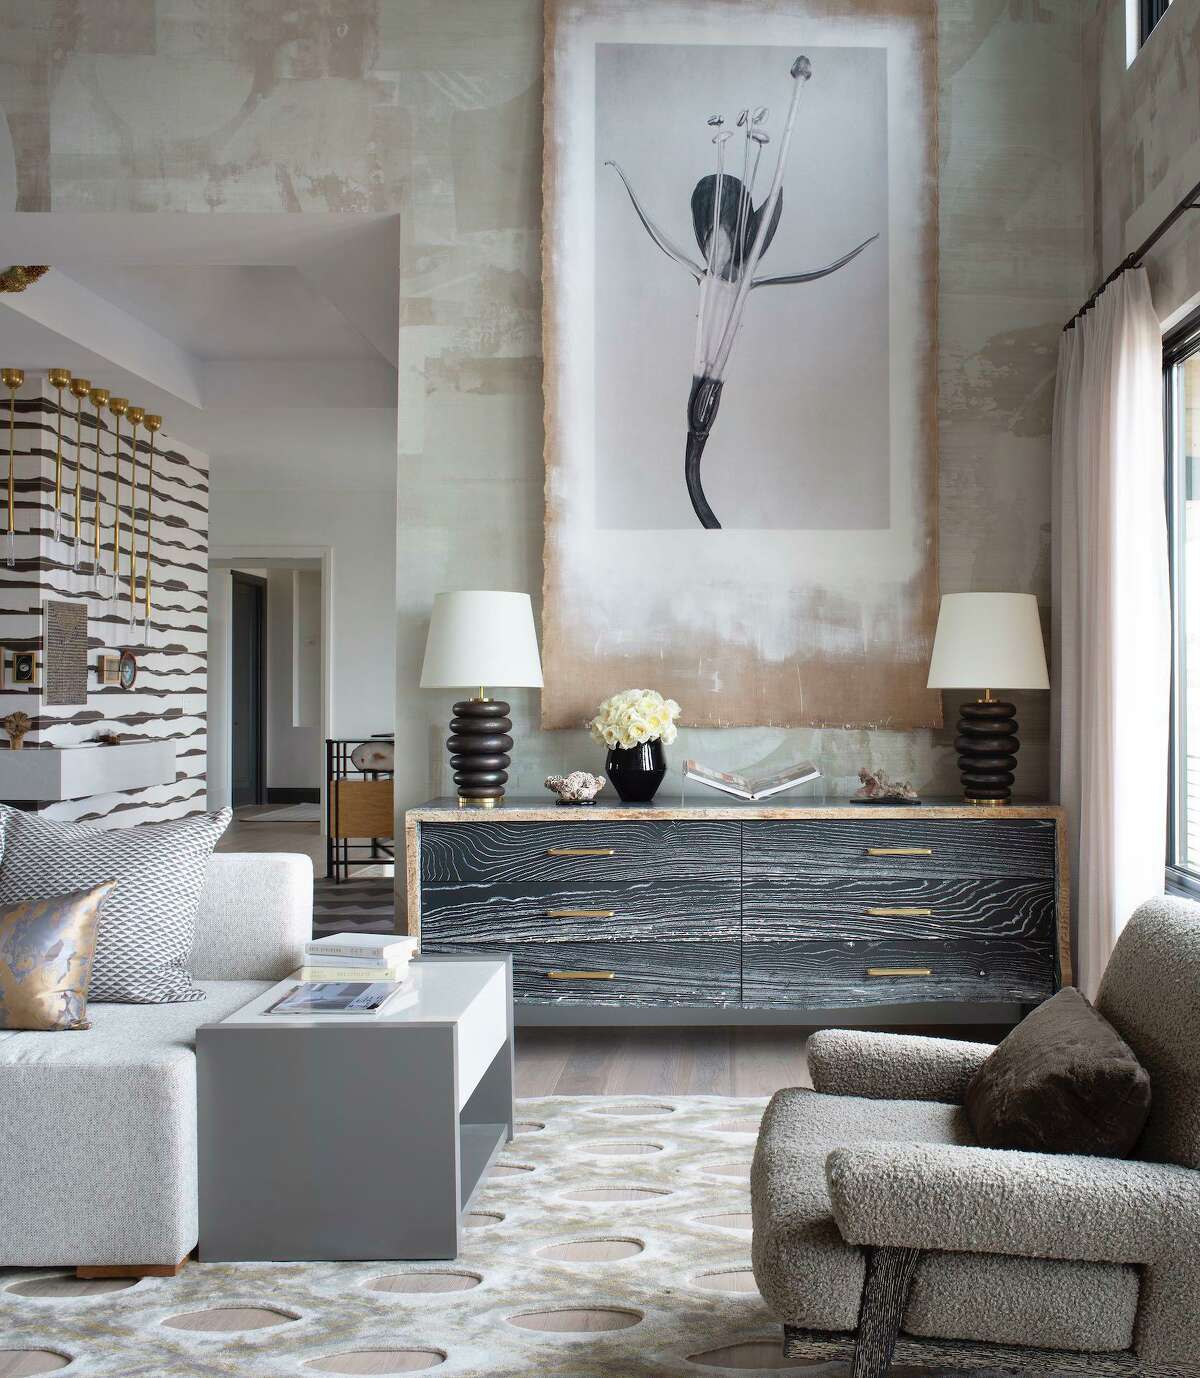 The large scale of Linarenos Moreno’s “Art Forms in Mechanism XXIV” makes it a dramatic focal point. The botanical print on burlap also adds texture to a room for House Beautiful’s Whole Home Concept House in Denver designed by Lucinda Loya with art consultant Lea Weingarten.